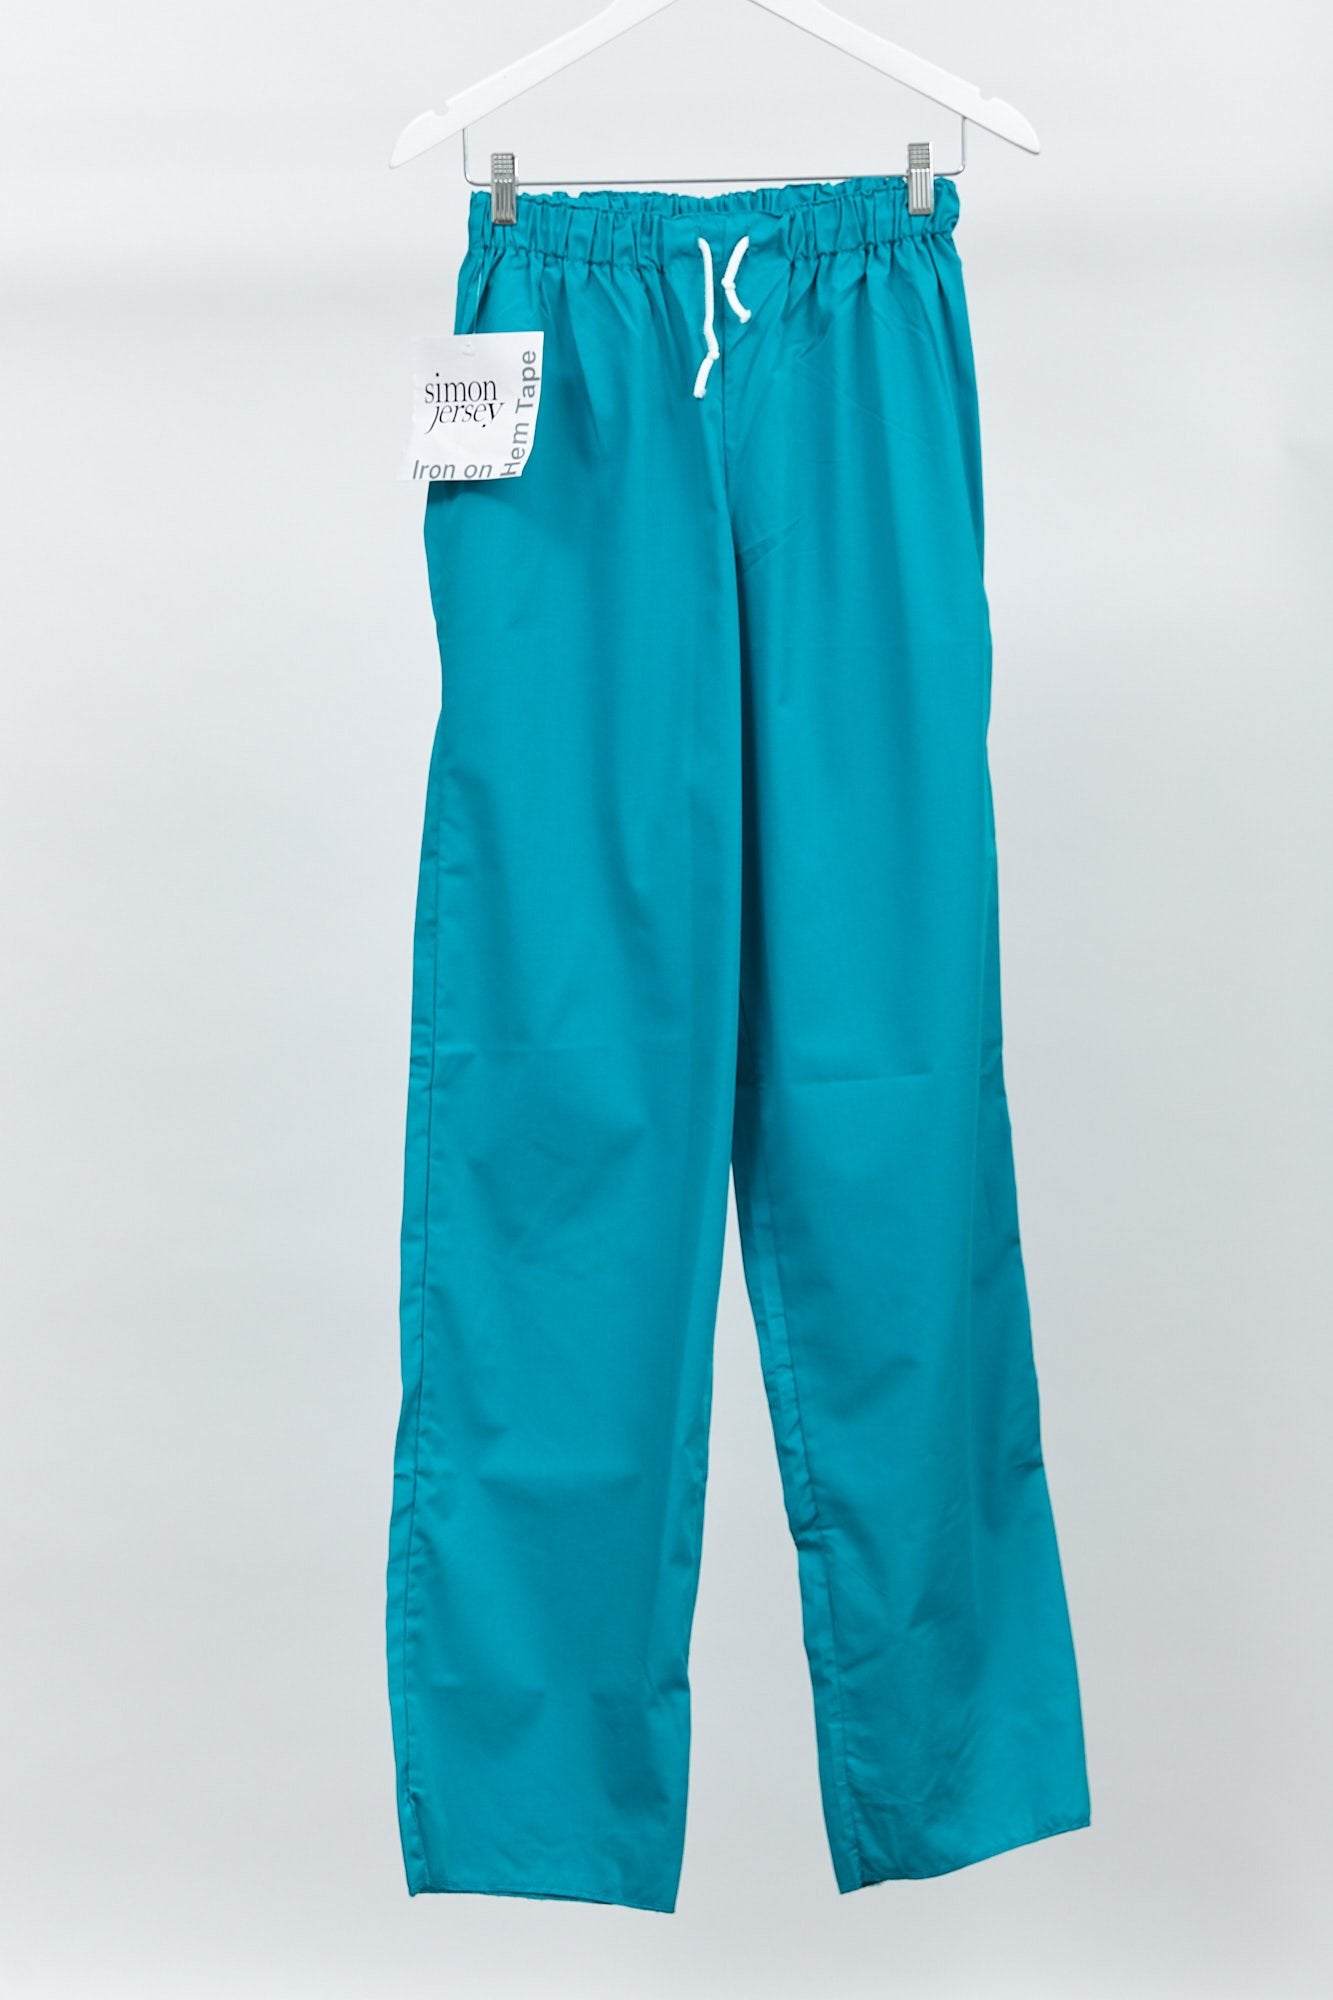 Womens Turquoise Blue Medical Scrub Trousers: Size Small